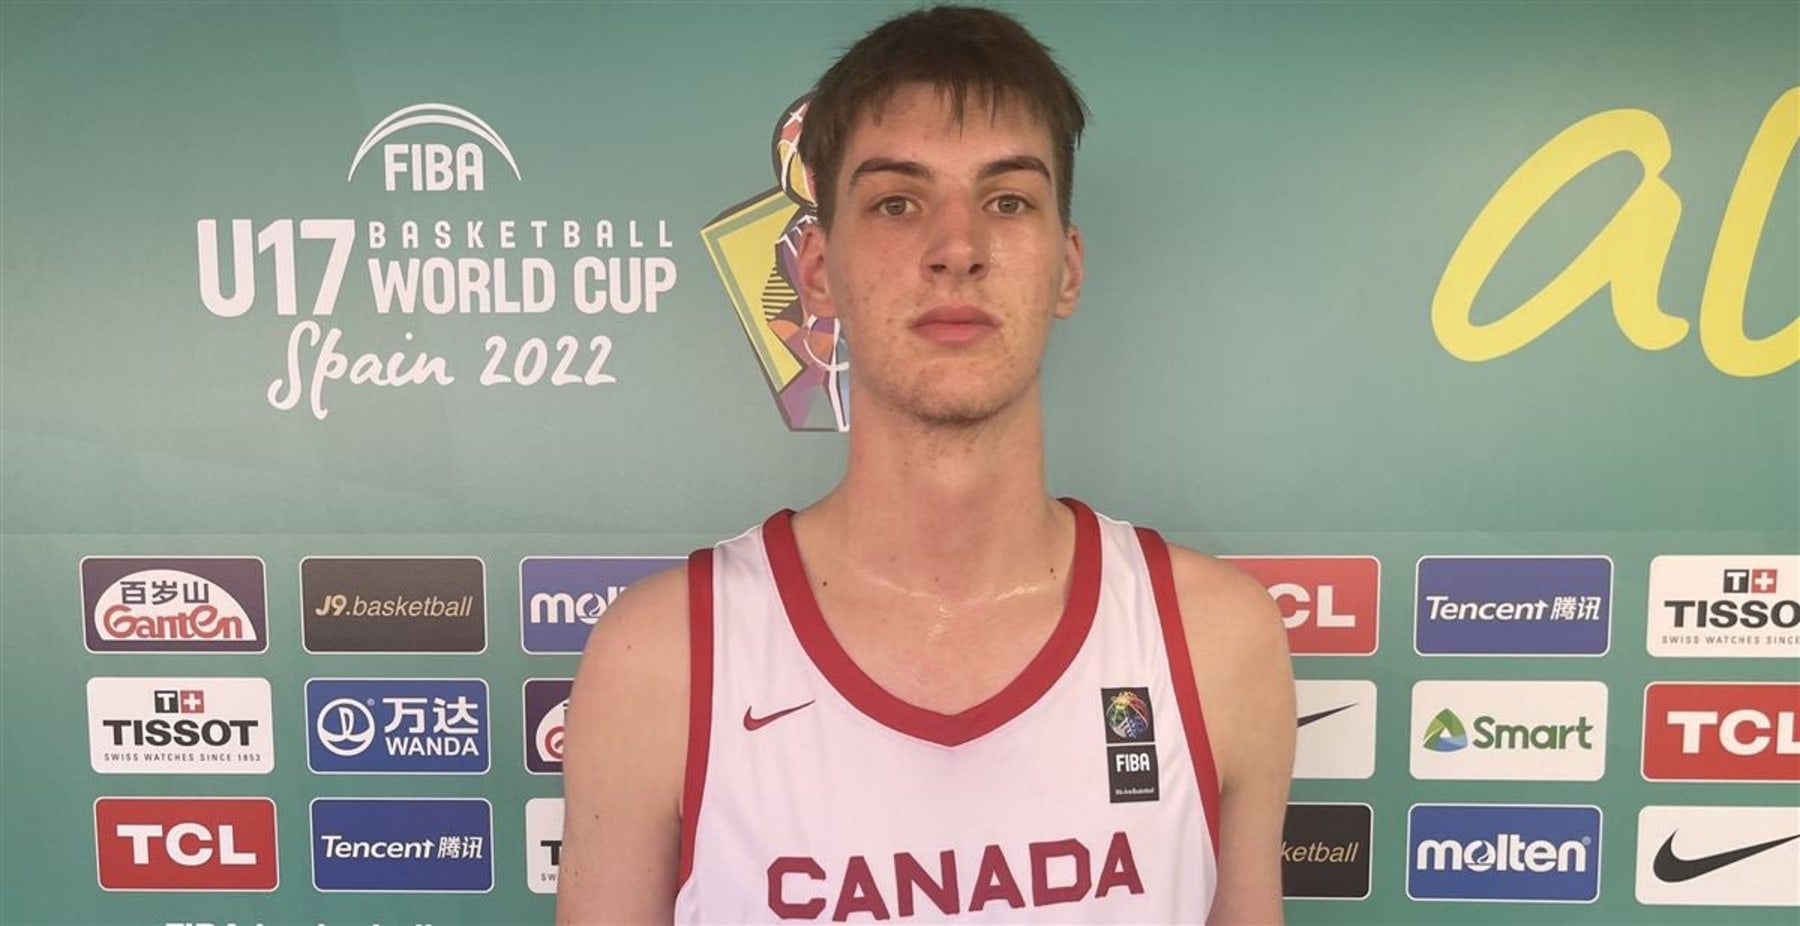 7’9″ Teenager Olivier Rioux Breaks World Record as Tallest Teen; Commits to Florida College Basketball